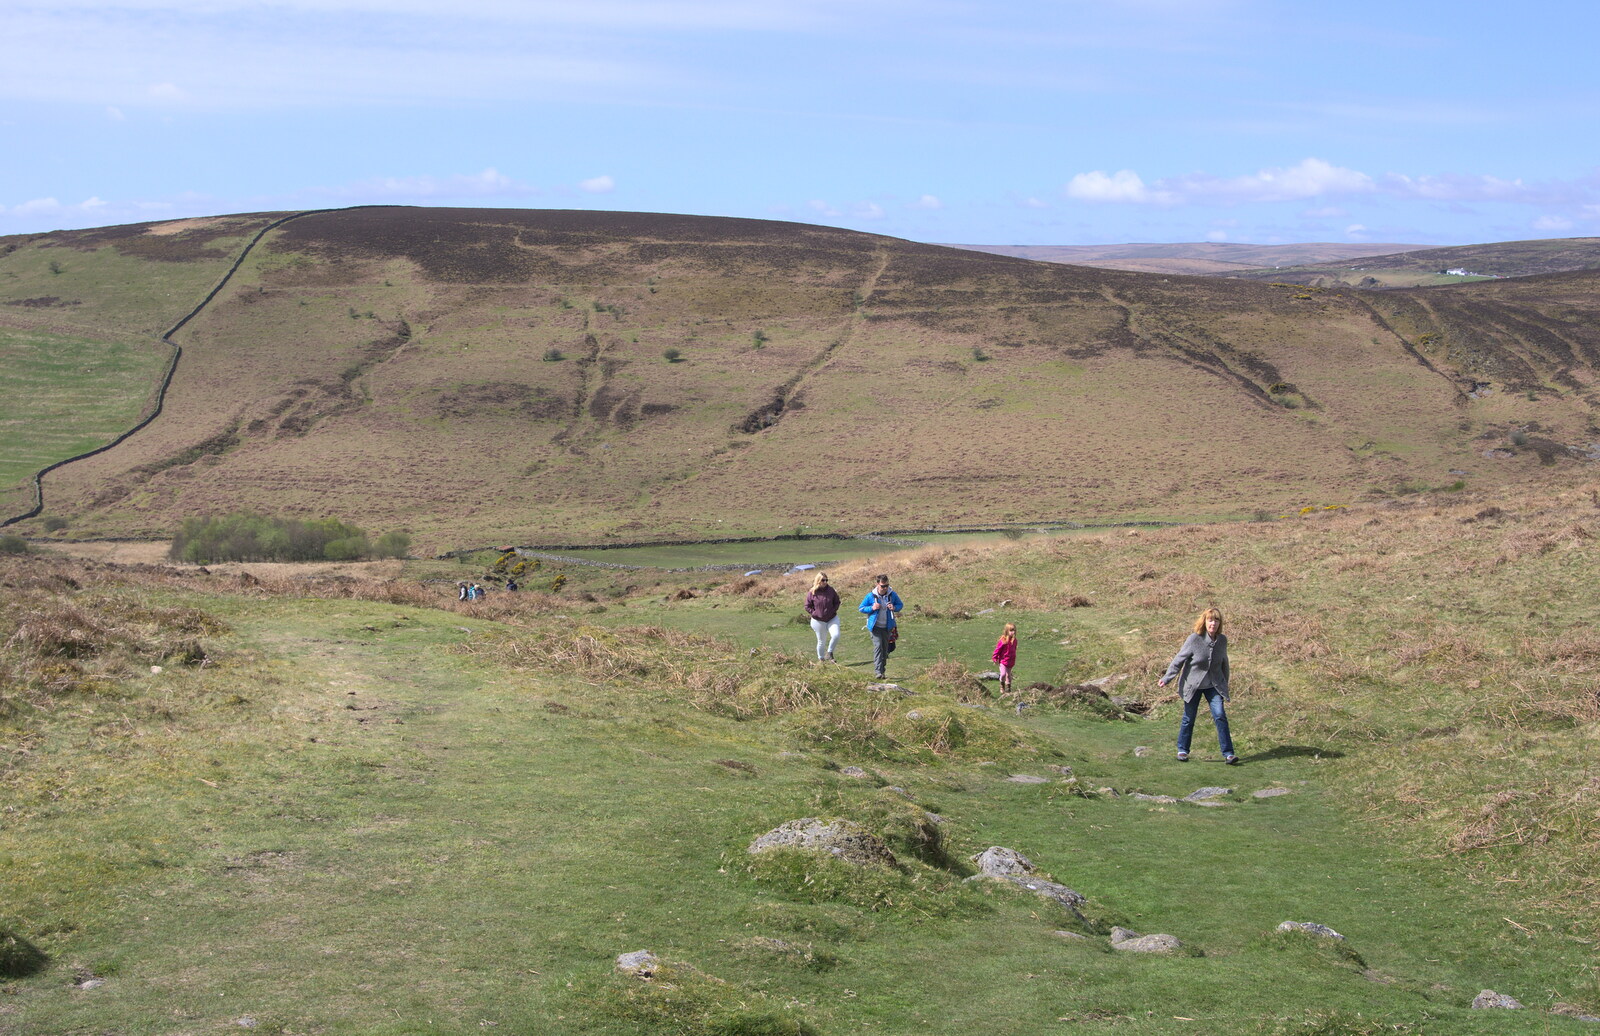 Mother leads the way from A Barbeque, Grimspound and Pizza, Dartmoor and Exeter, Devon - 15th April 2017